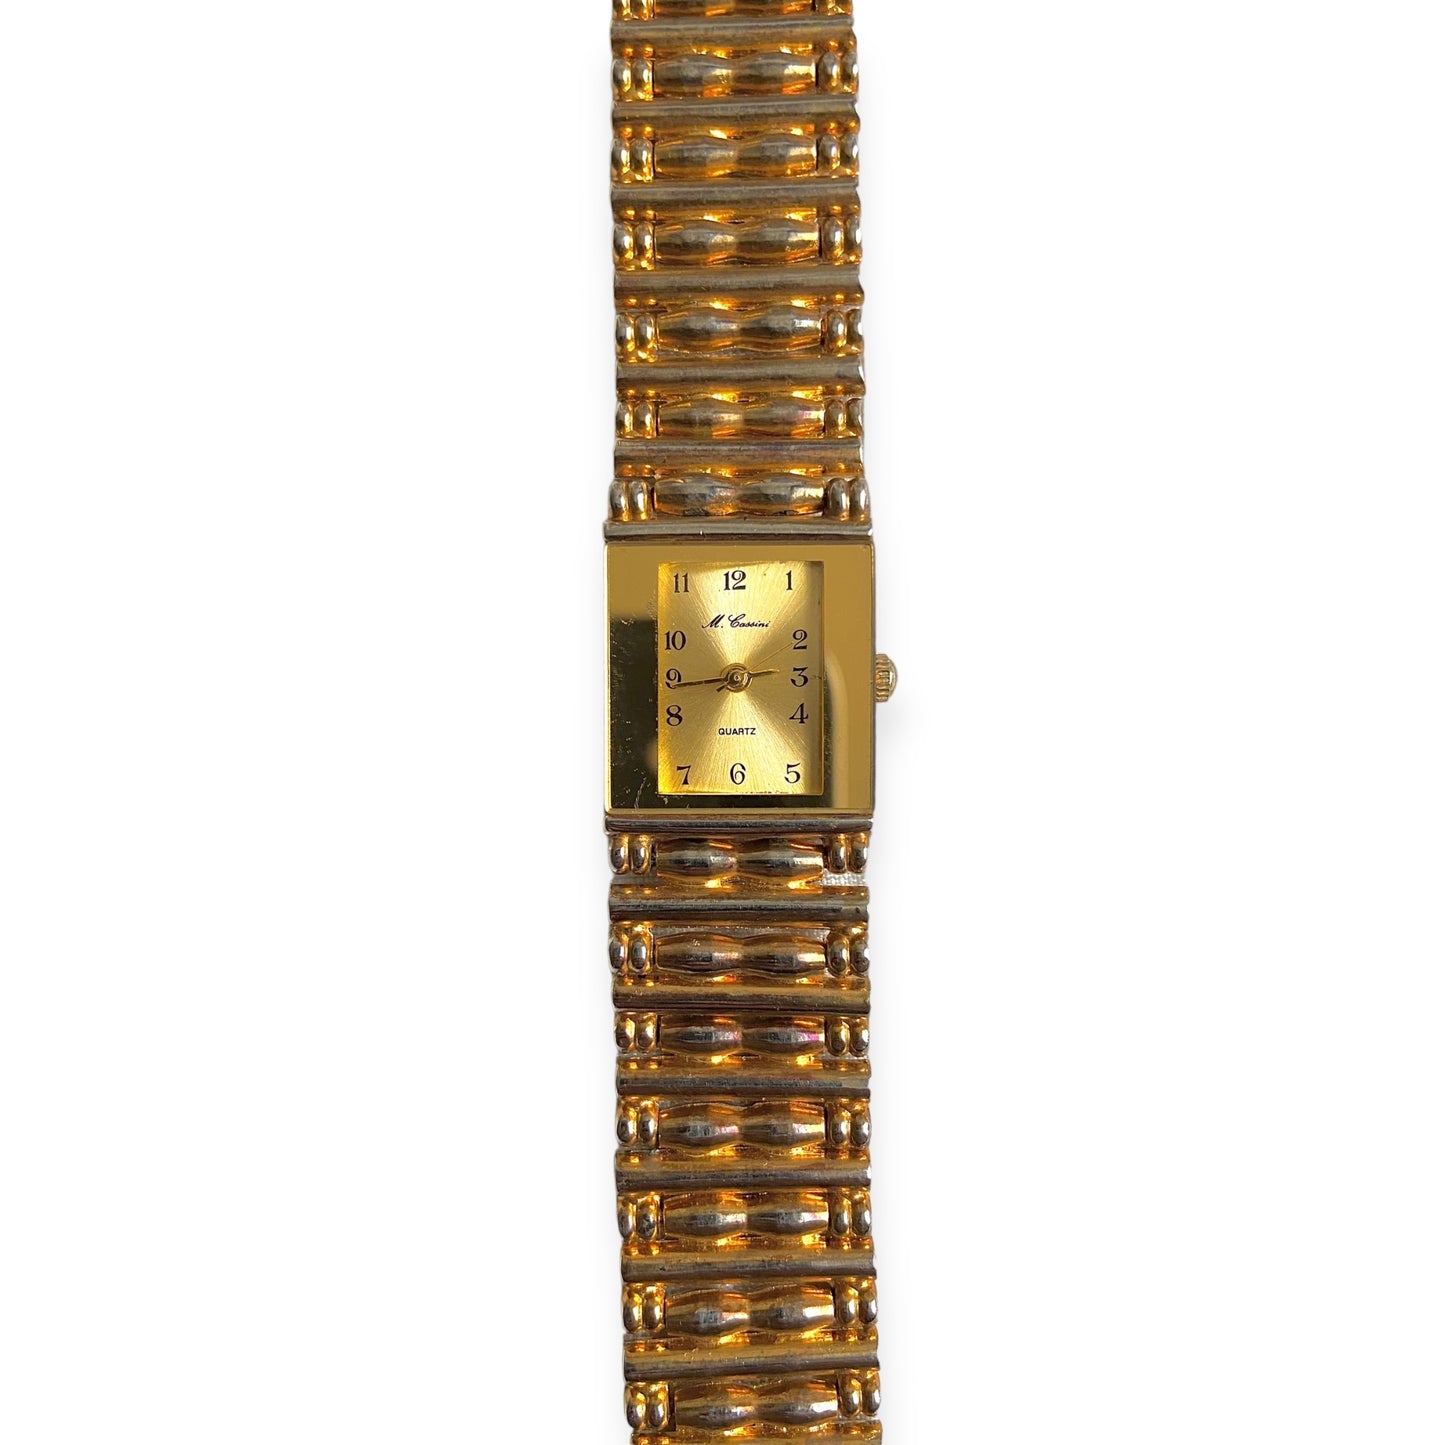 One-of-one | Quartz gold square watch